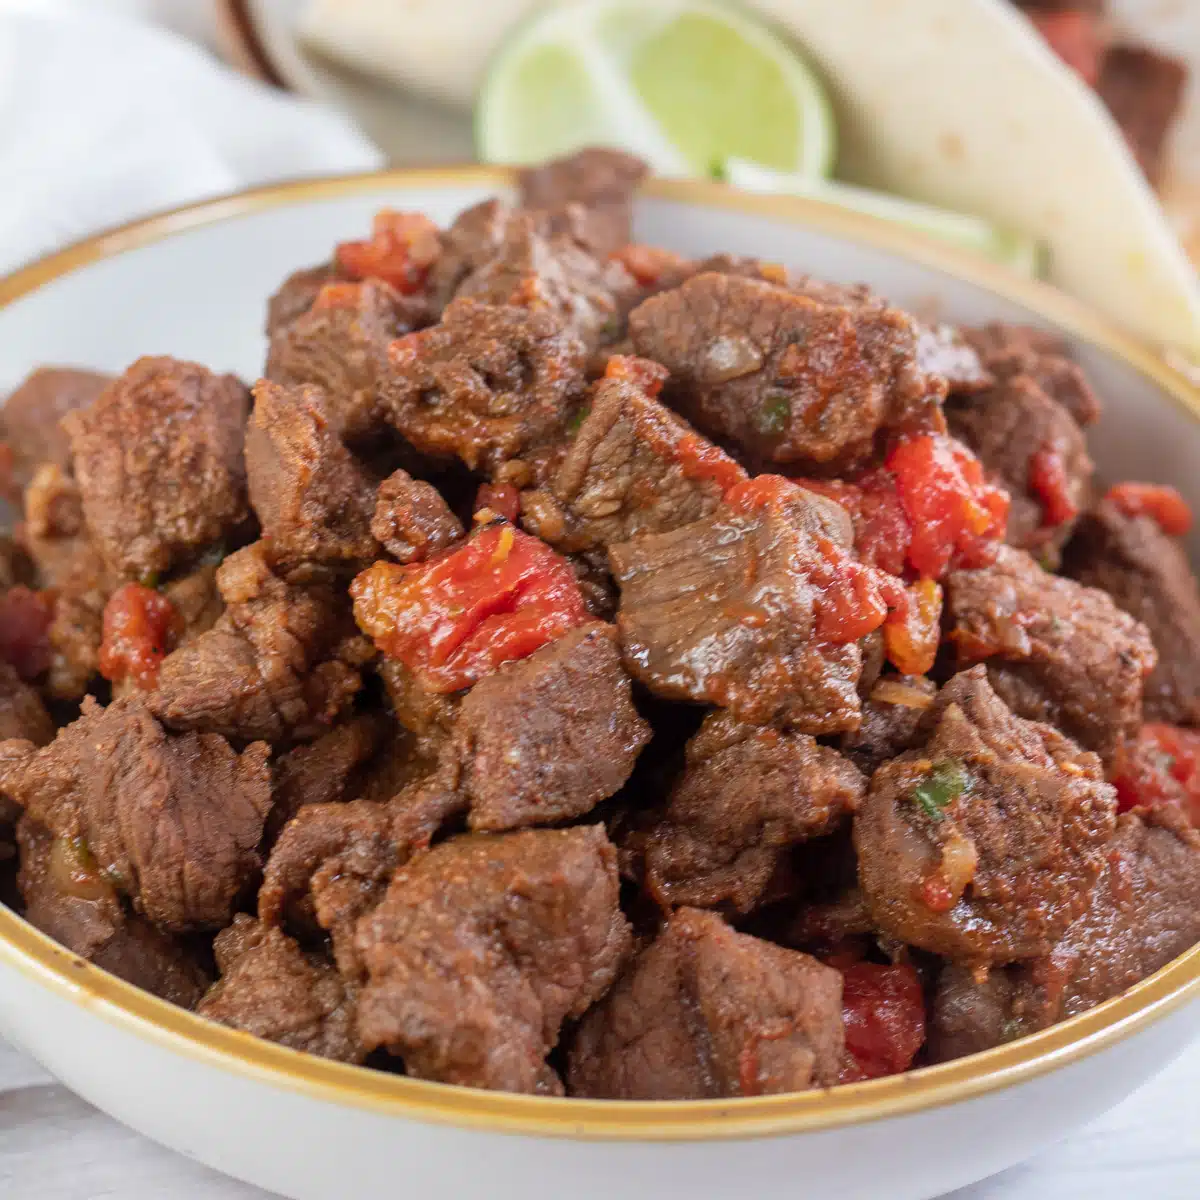 Tasty carne picada beef with seasoning and tomatoes ready to make tacos, burritos, enchiladas, and more.